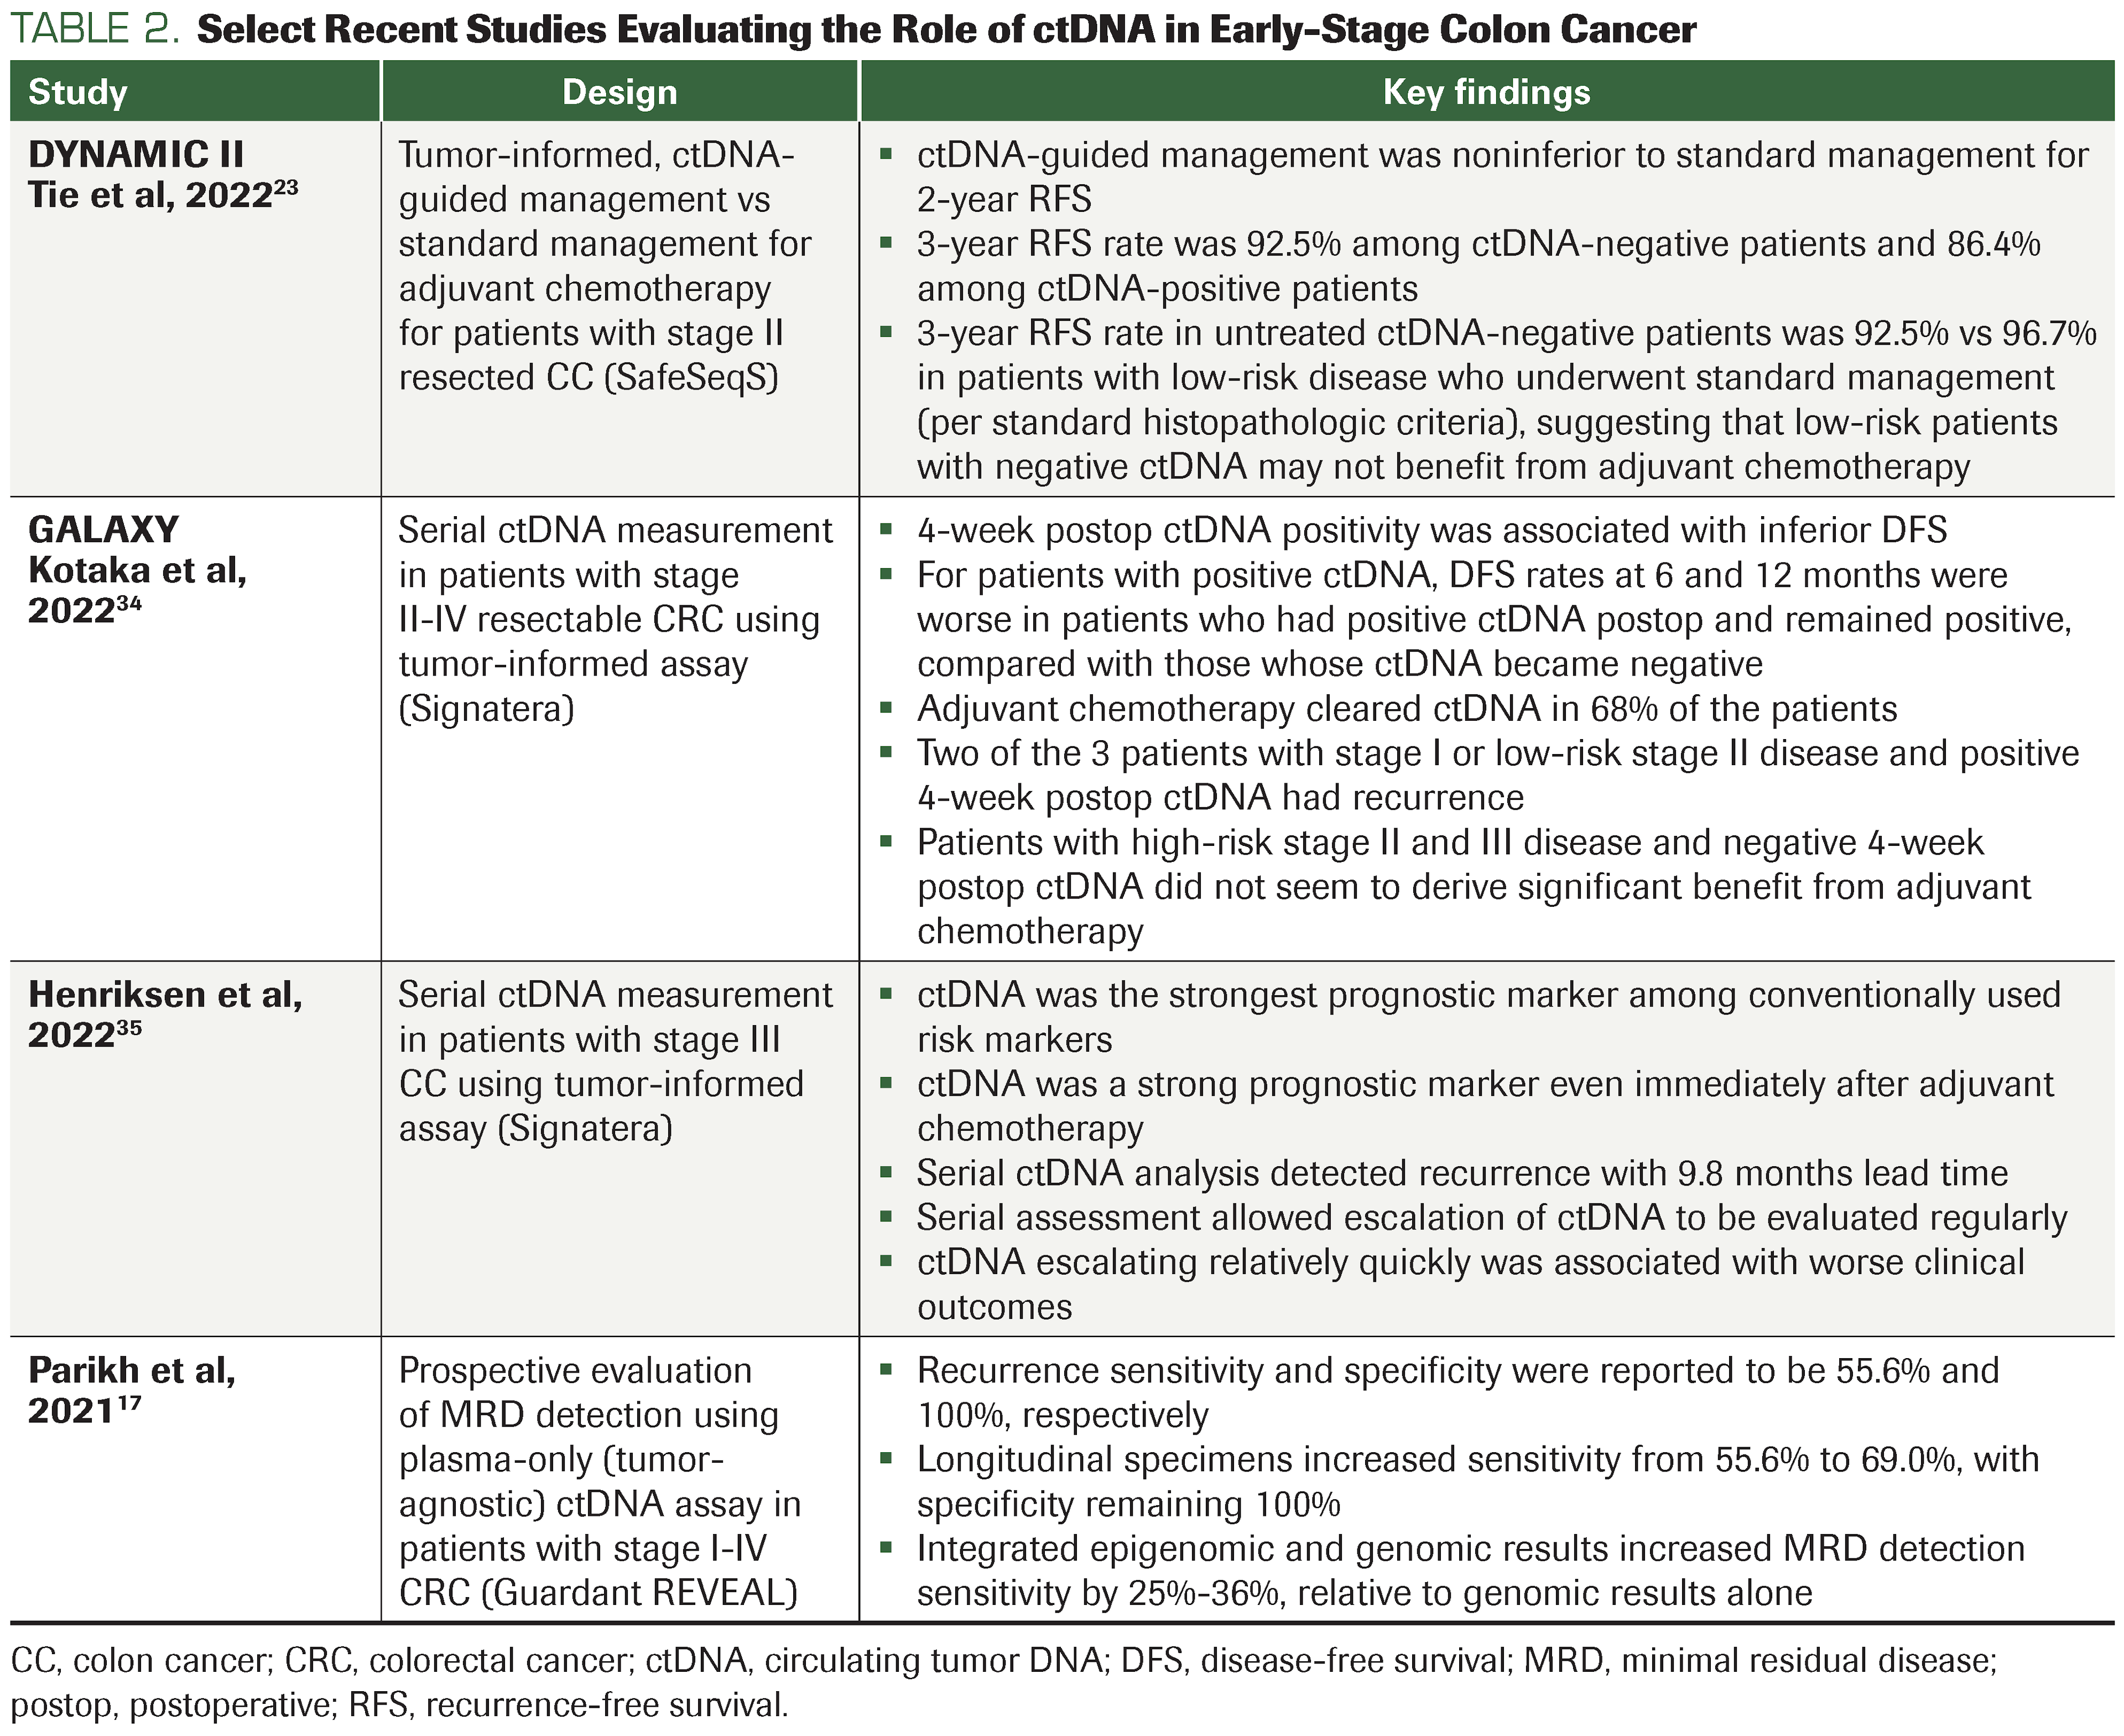 TABLE 2. Select Recent Studies Evaluating the Role of ctDNA in Early-Stage Colon Cancer